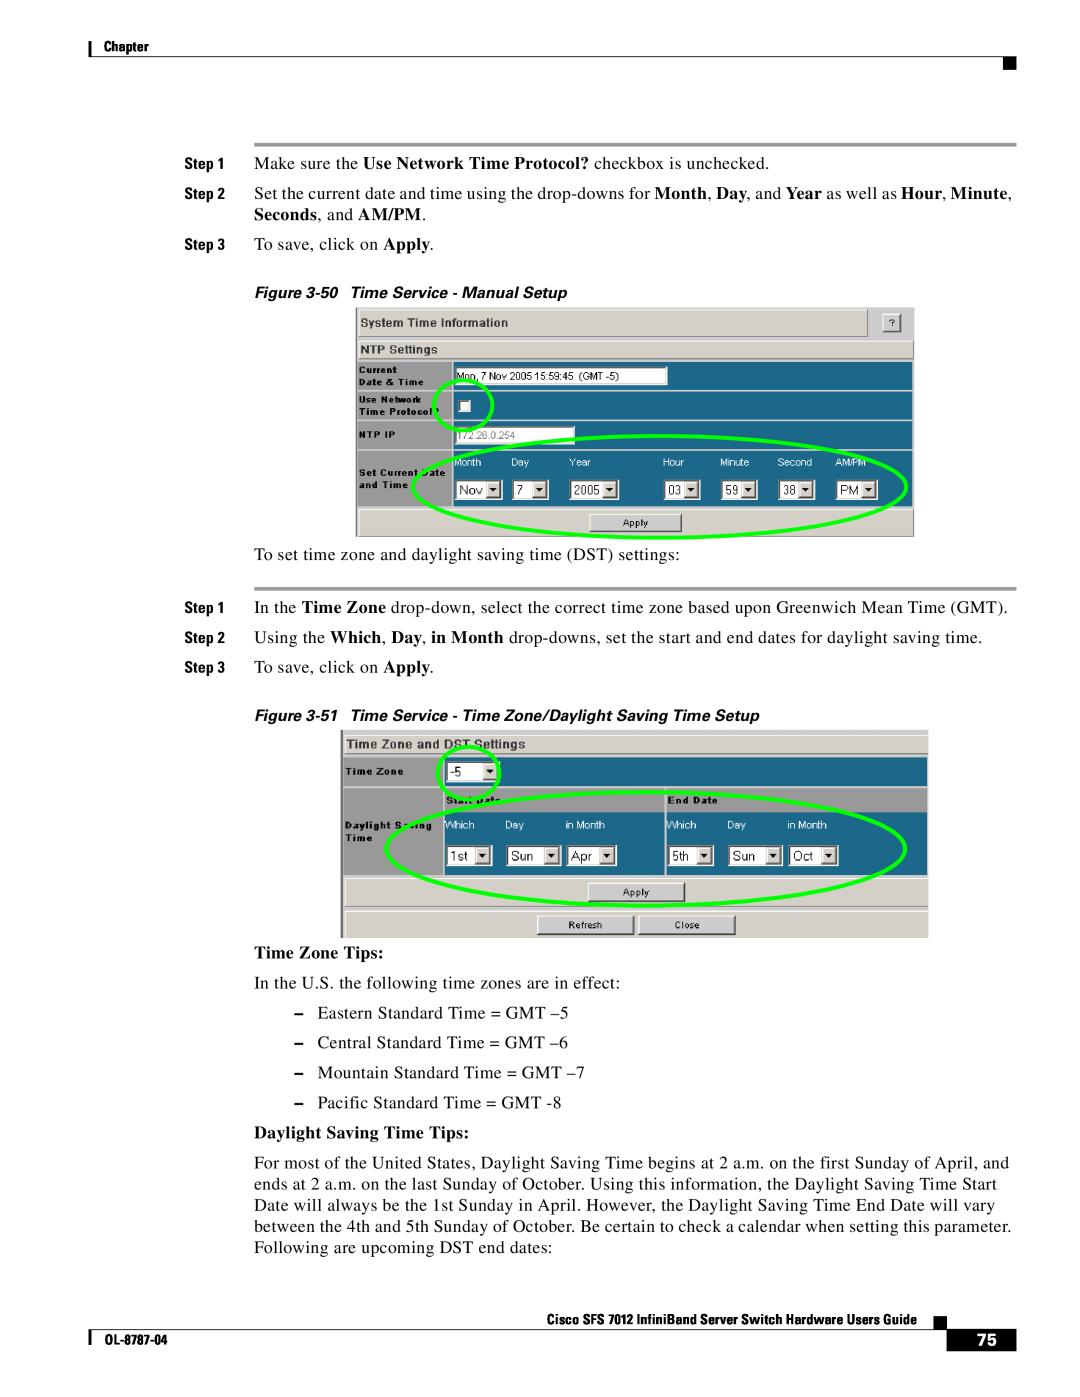 Cisco Systems SFS 7012 manual Time Zone Tips, Daylight Saving Time Tips, 50 Time Service - Manual Setup 